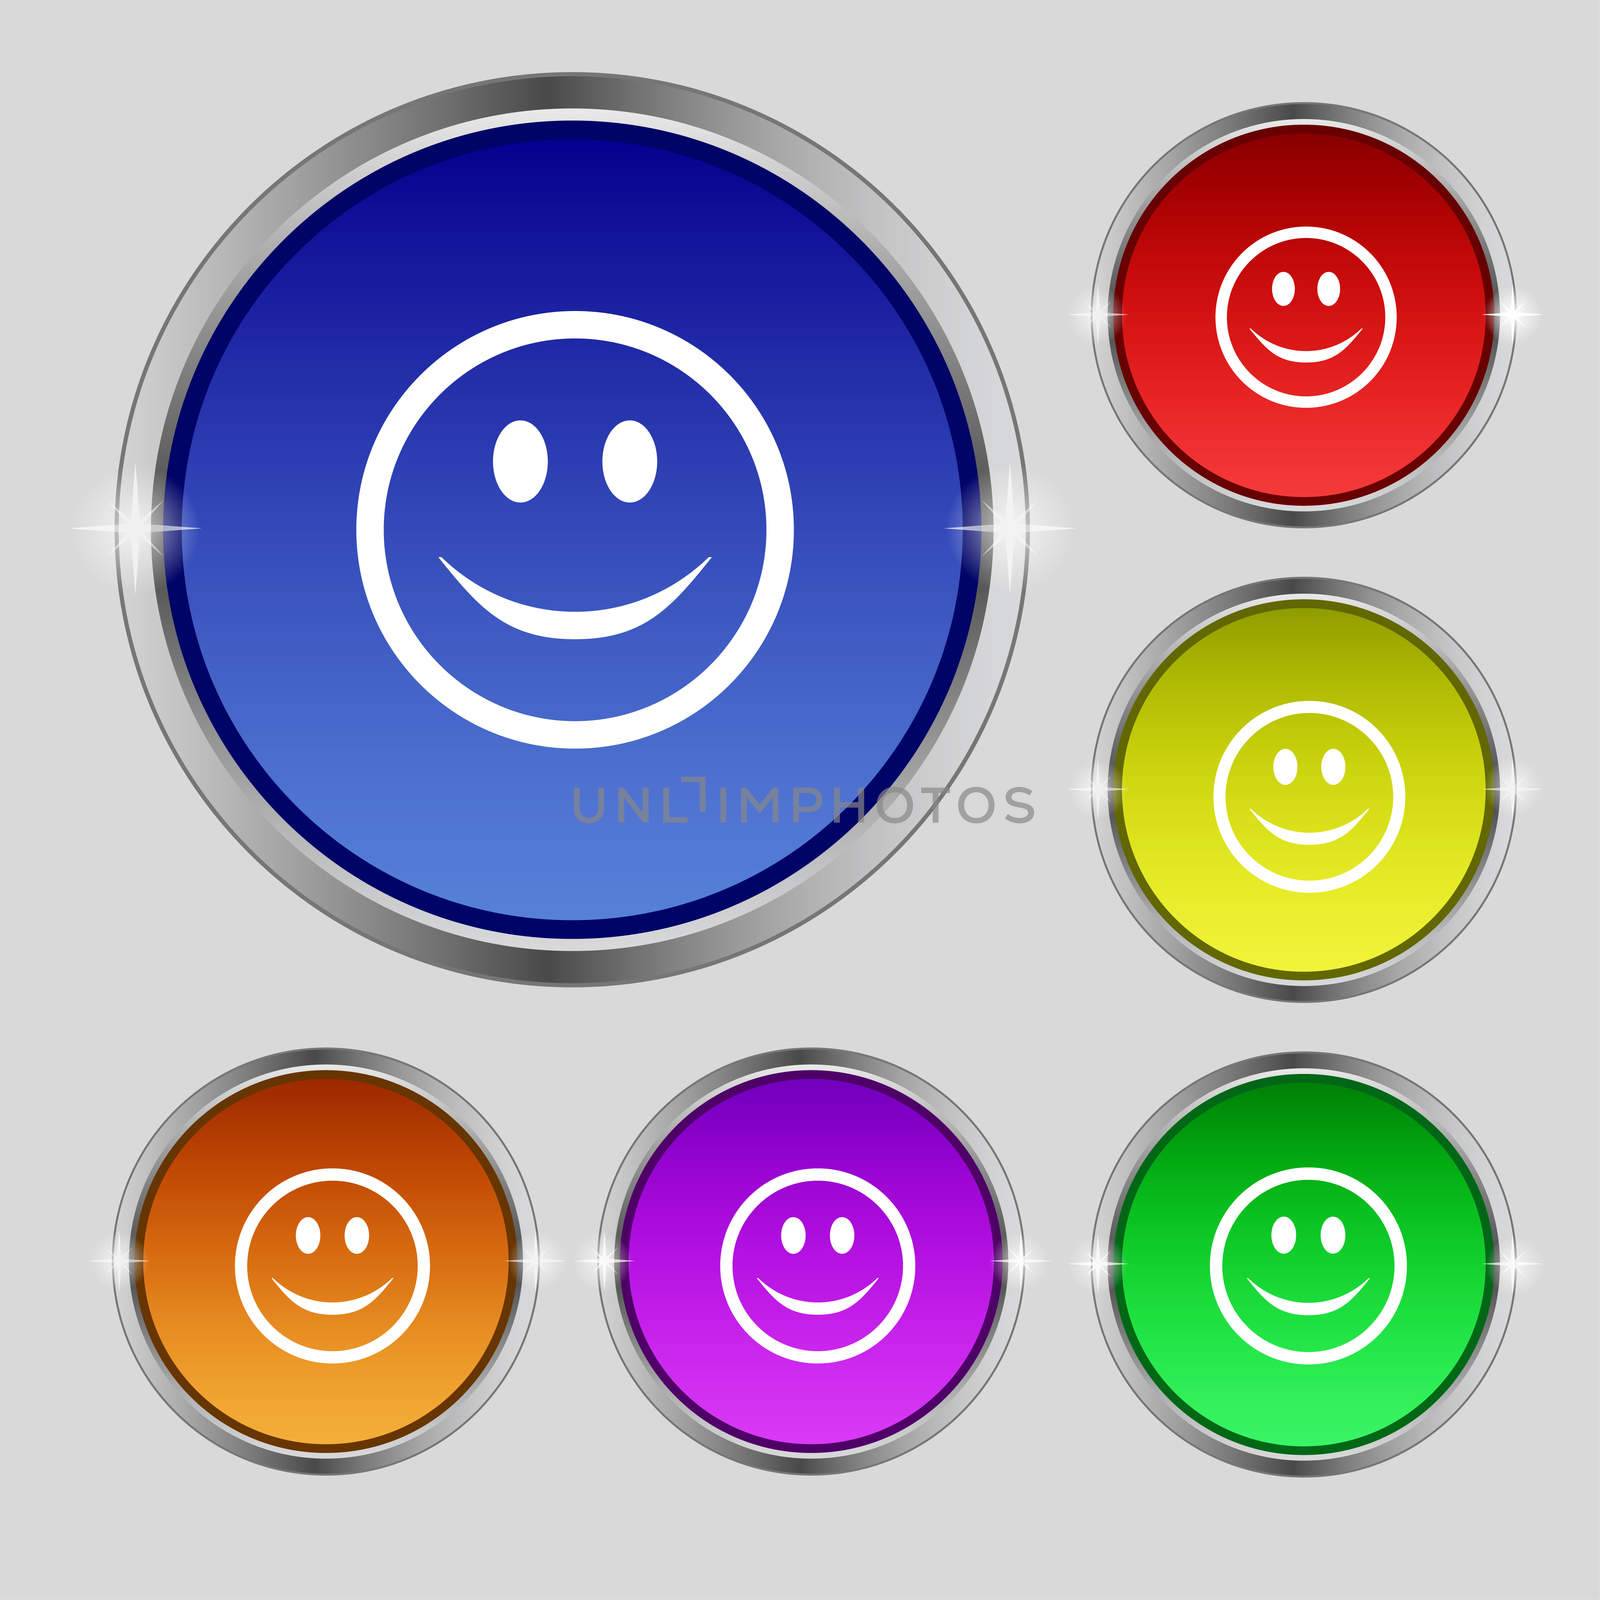 Smile, Happy face icon sign. Round symbol on bright colourful buttons. illustration